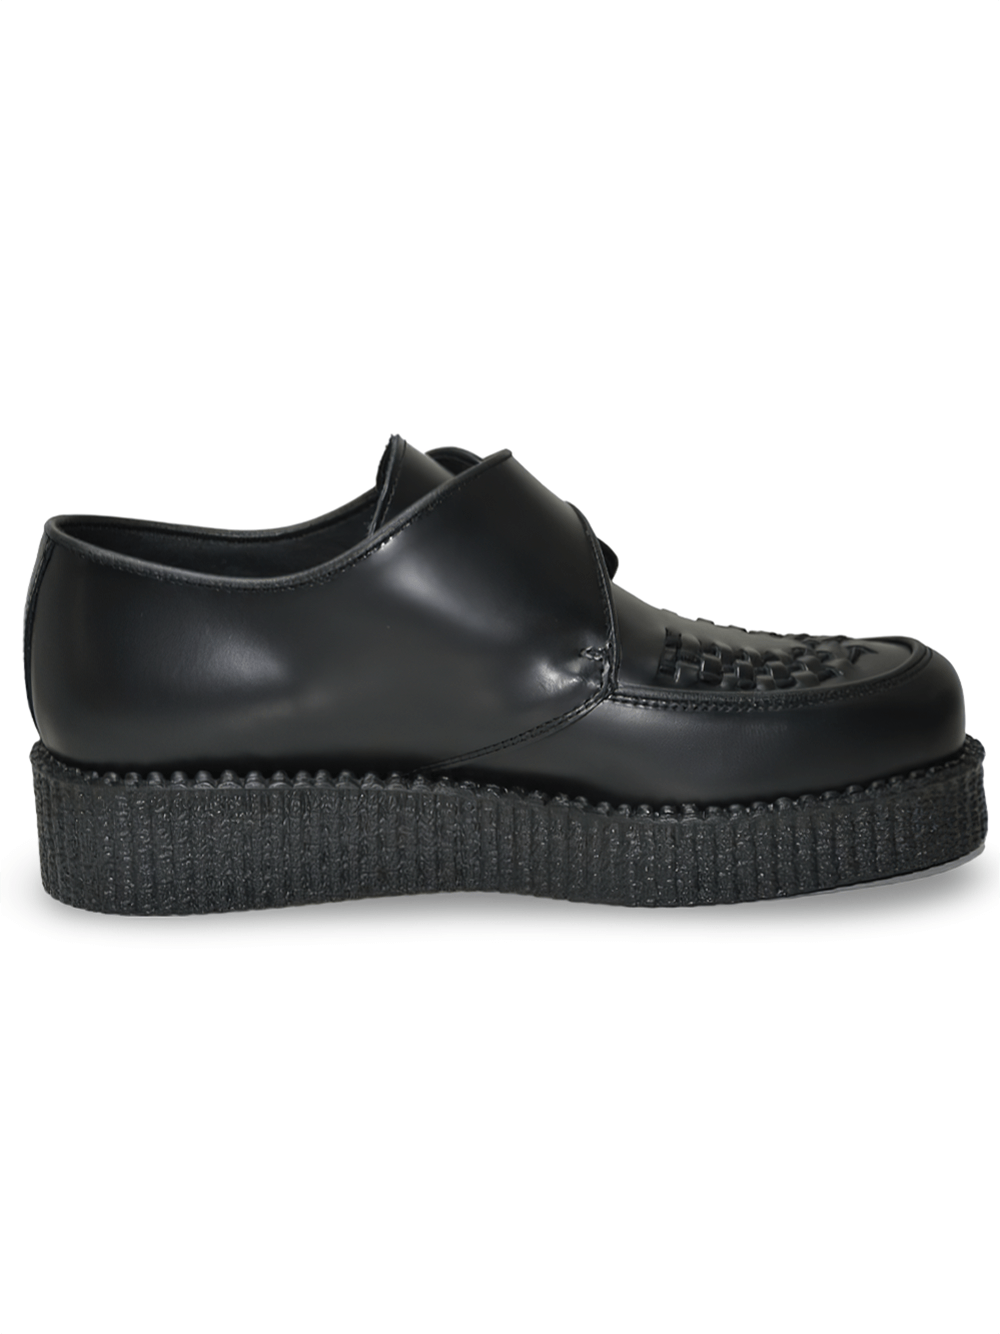 Urban Chic Black Leather Creepers with Rubber Sole